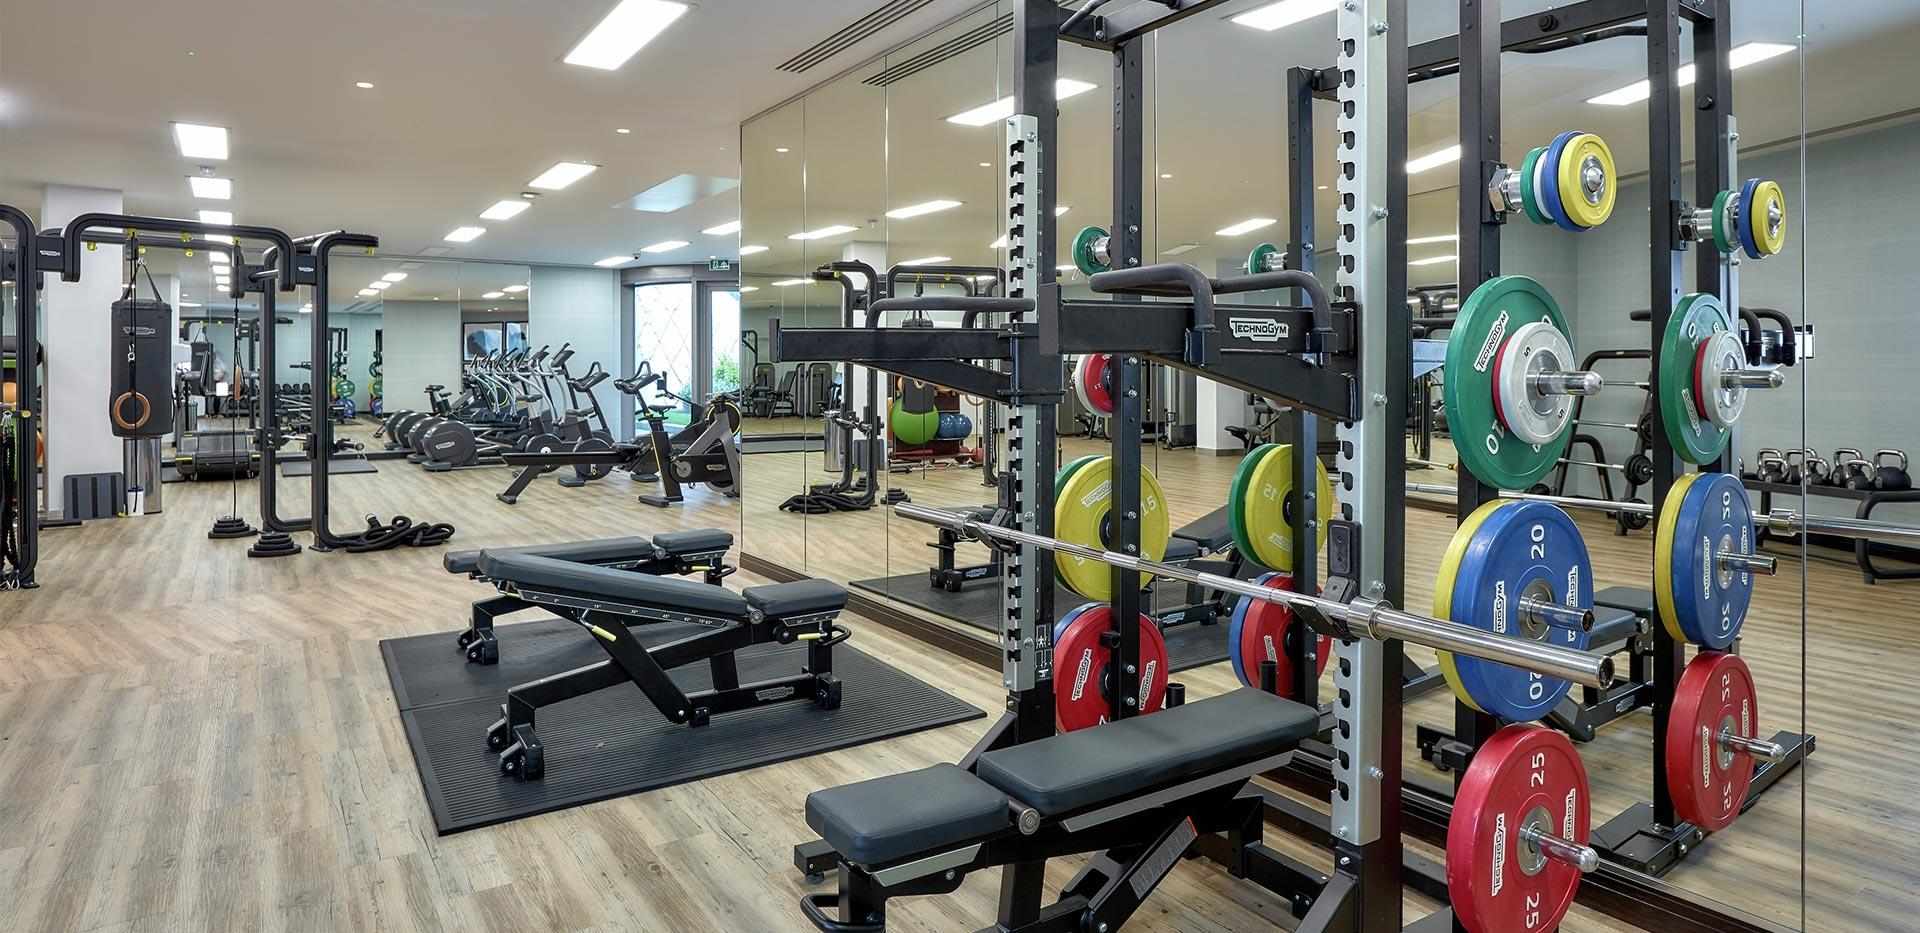 St George, One Blackfriars, Residential Facilities, Fitness Suite